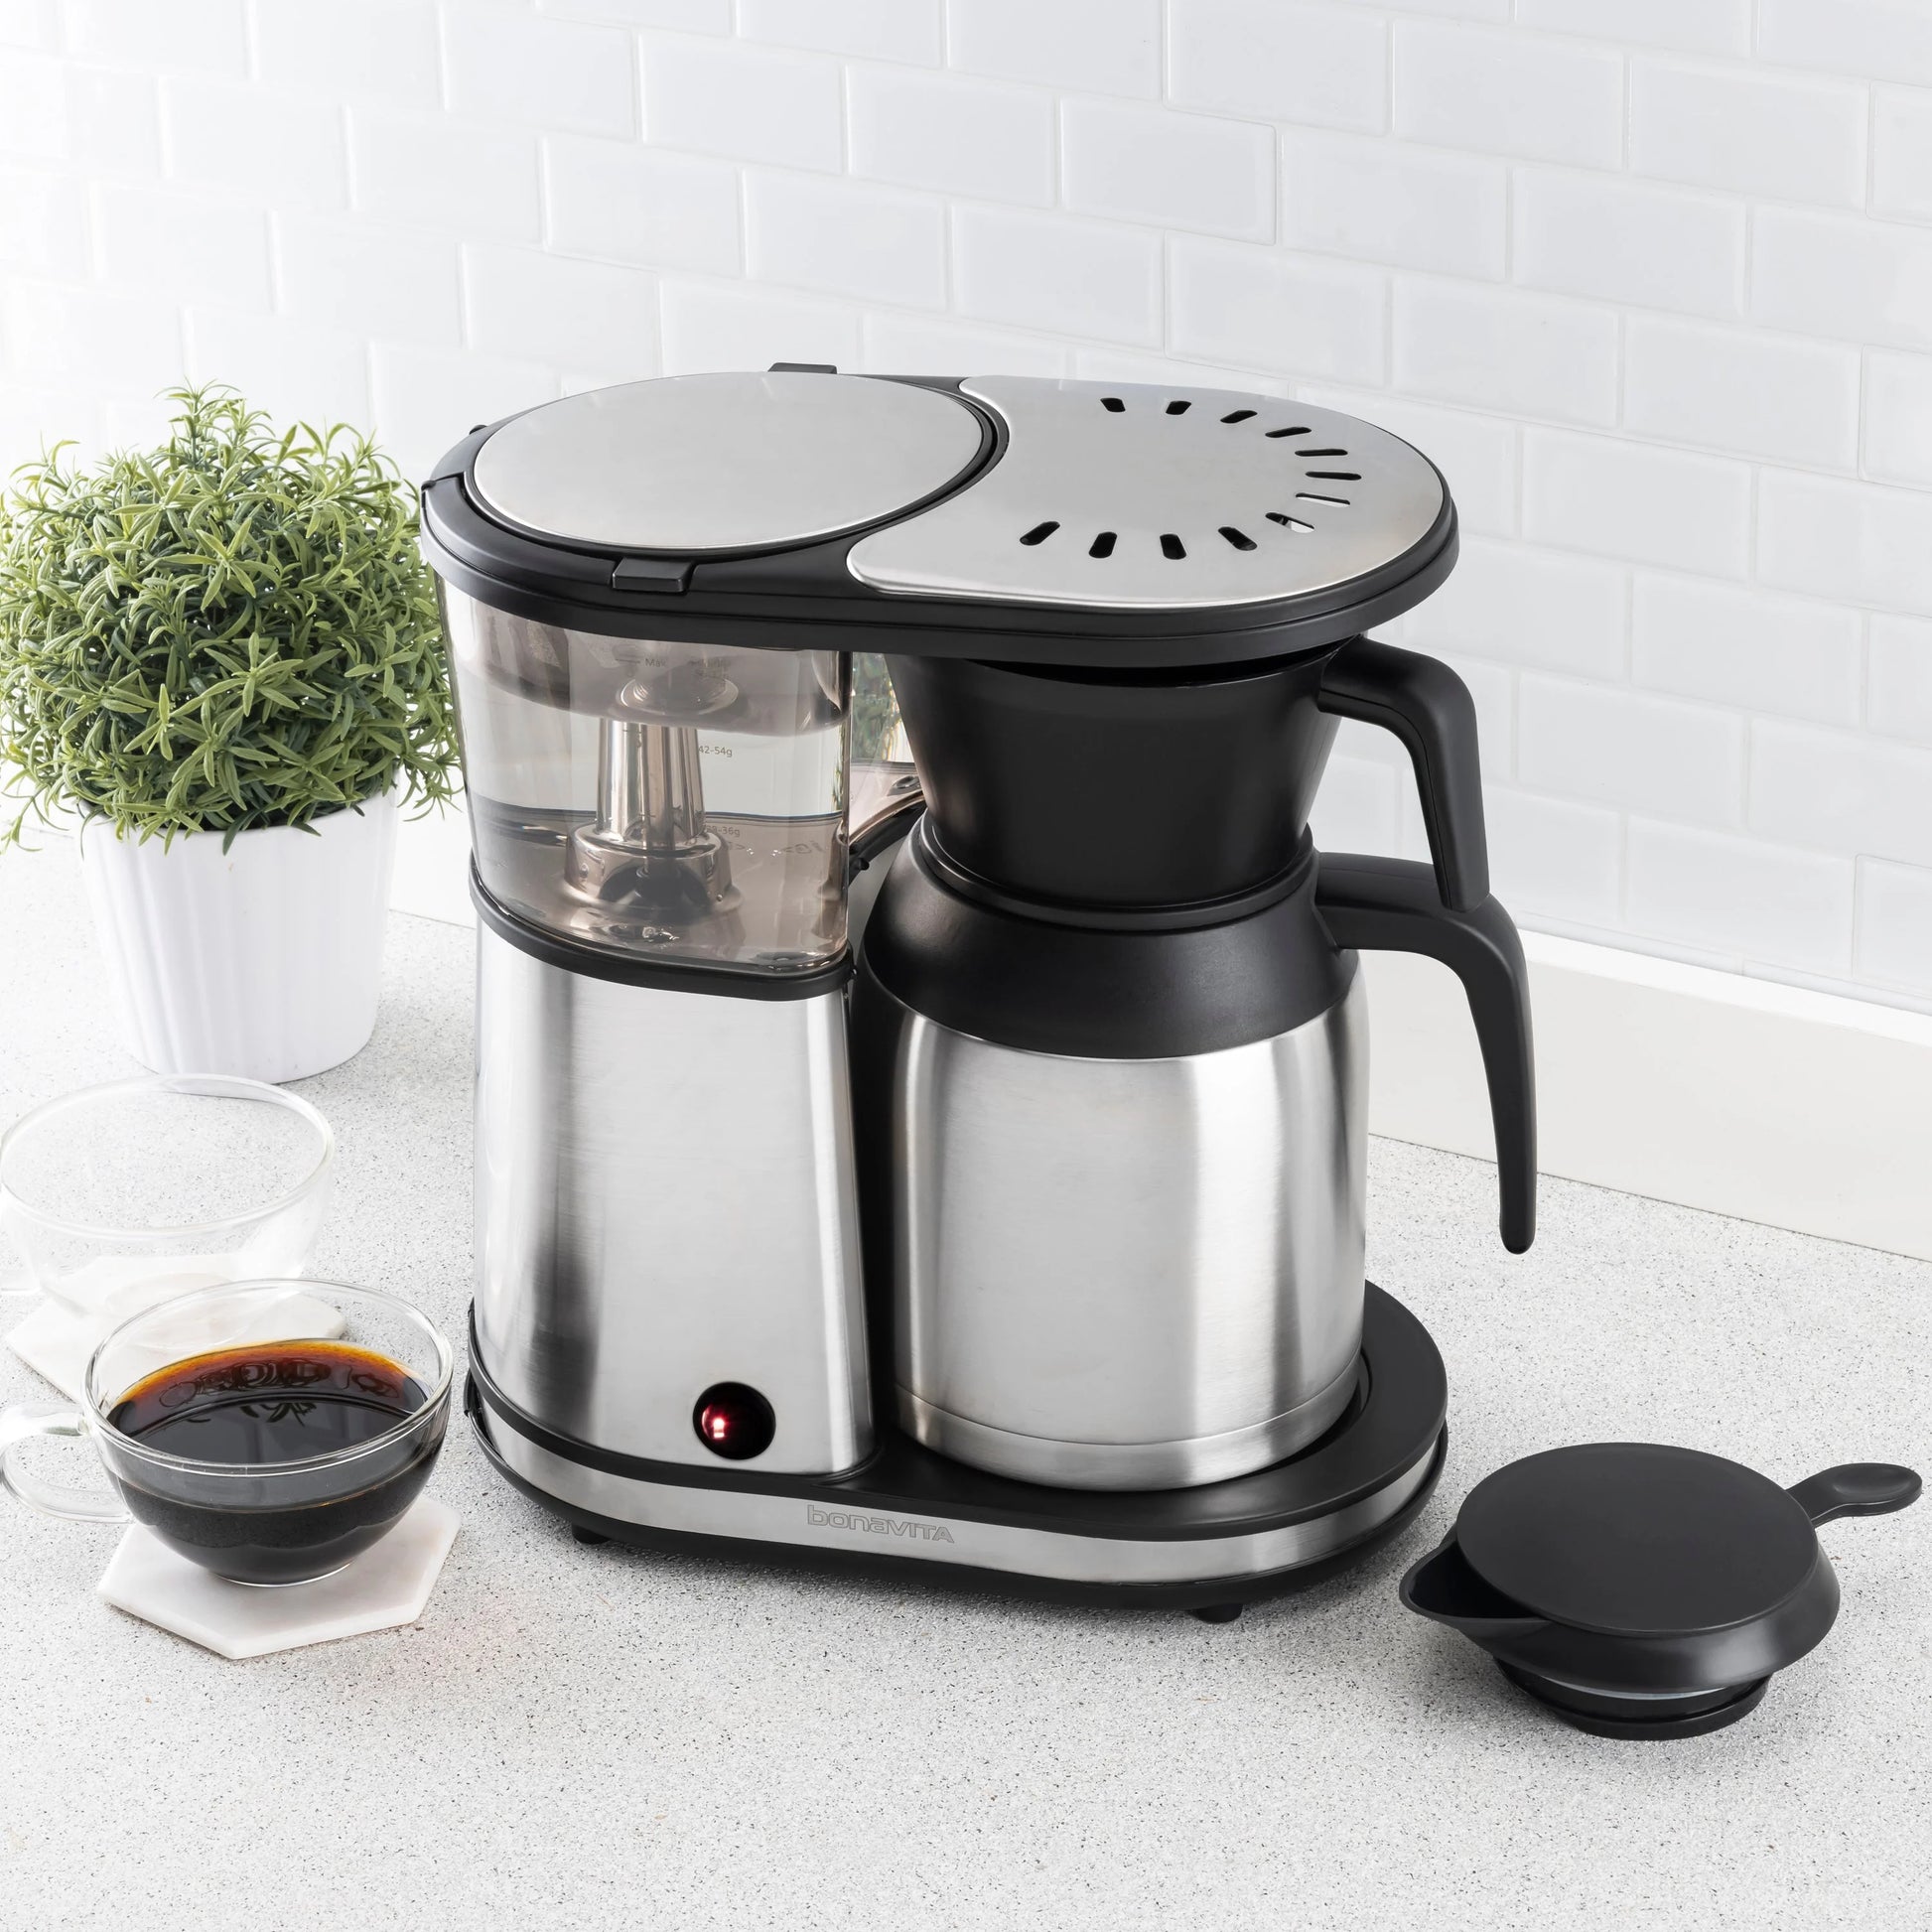 Bonavita 8-Cup Stainless Steel Carafe Coffee Brewer – The Concentrated Cup